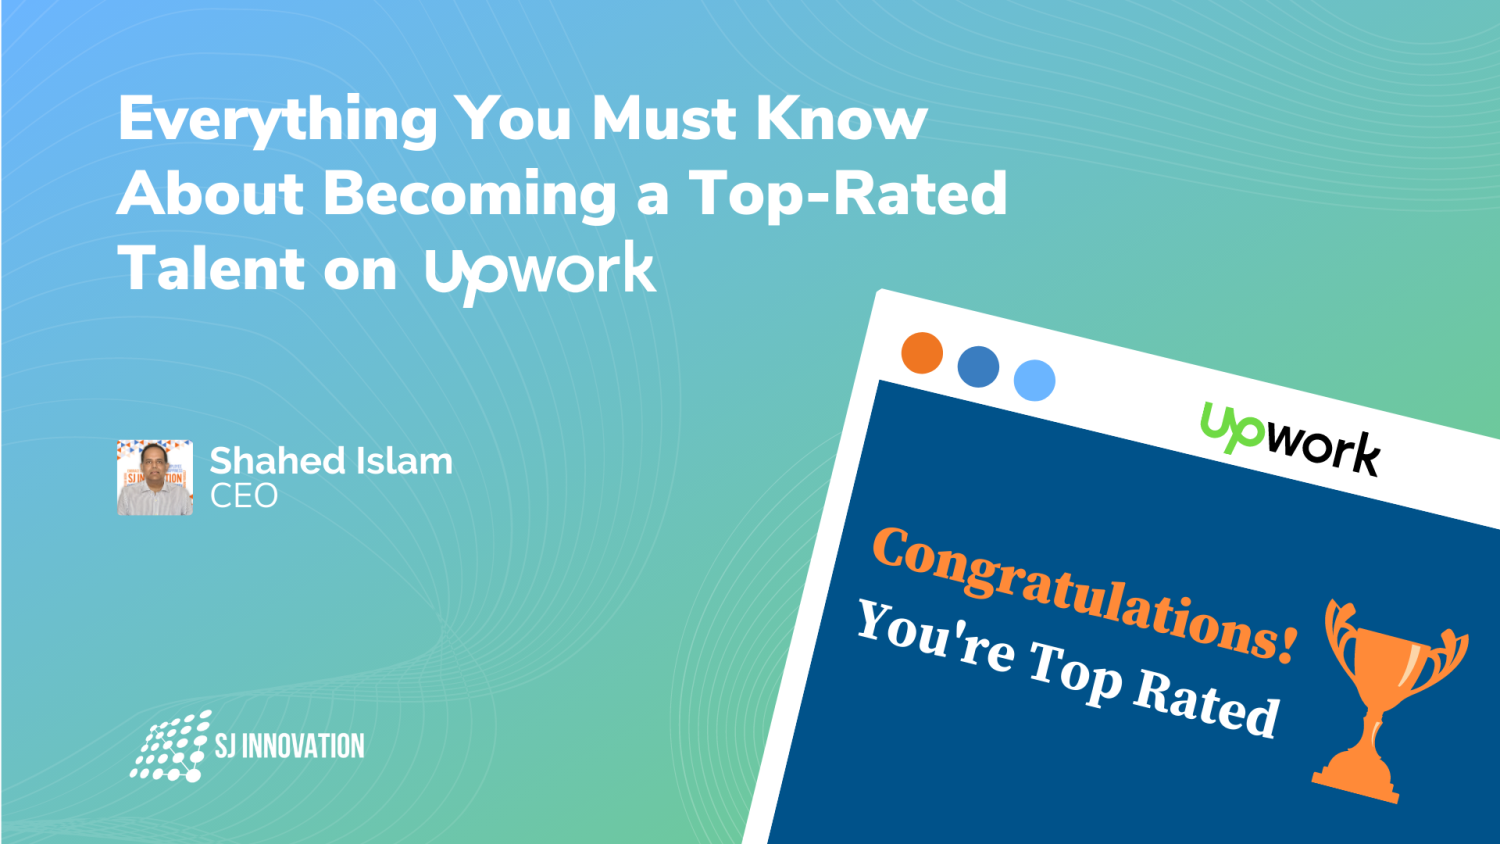 https://sjinnovation.com/sites/default/files/pictures/blog-post/Everything%20You%20Must%20Know%20About%20Becoming%20a%20Top-Rated%20Talent%20on%20Upwork.png